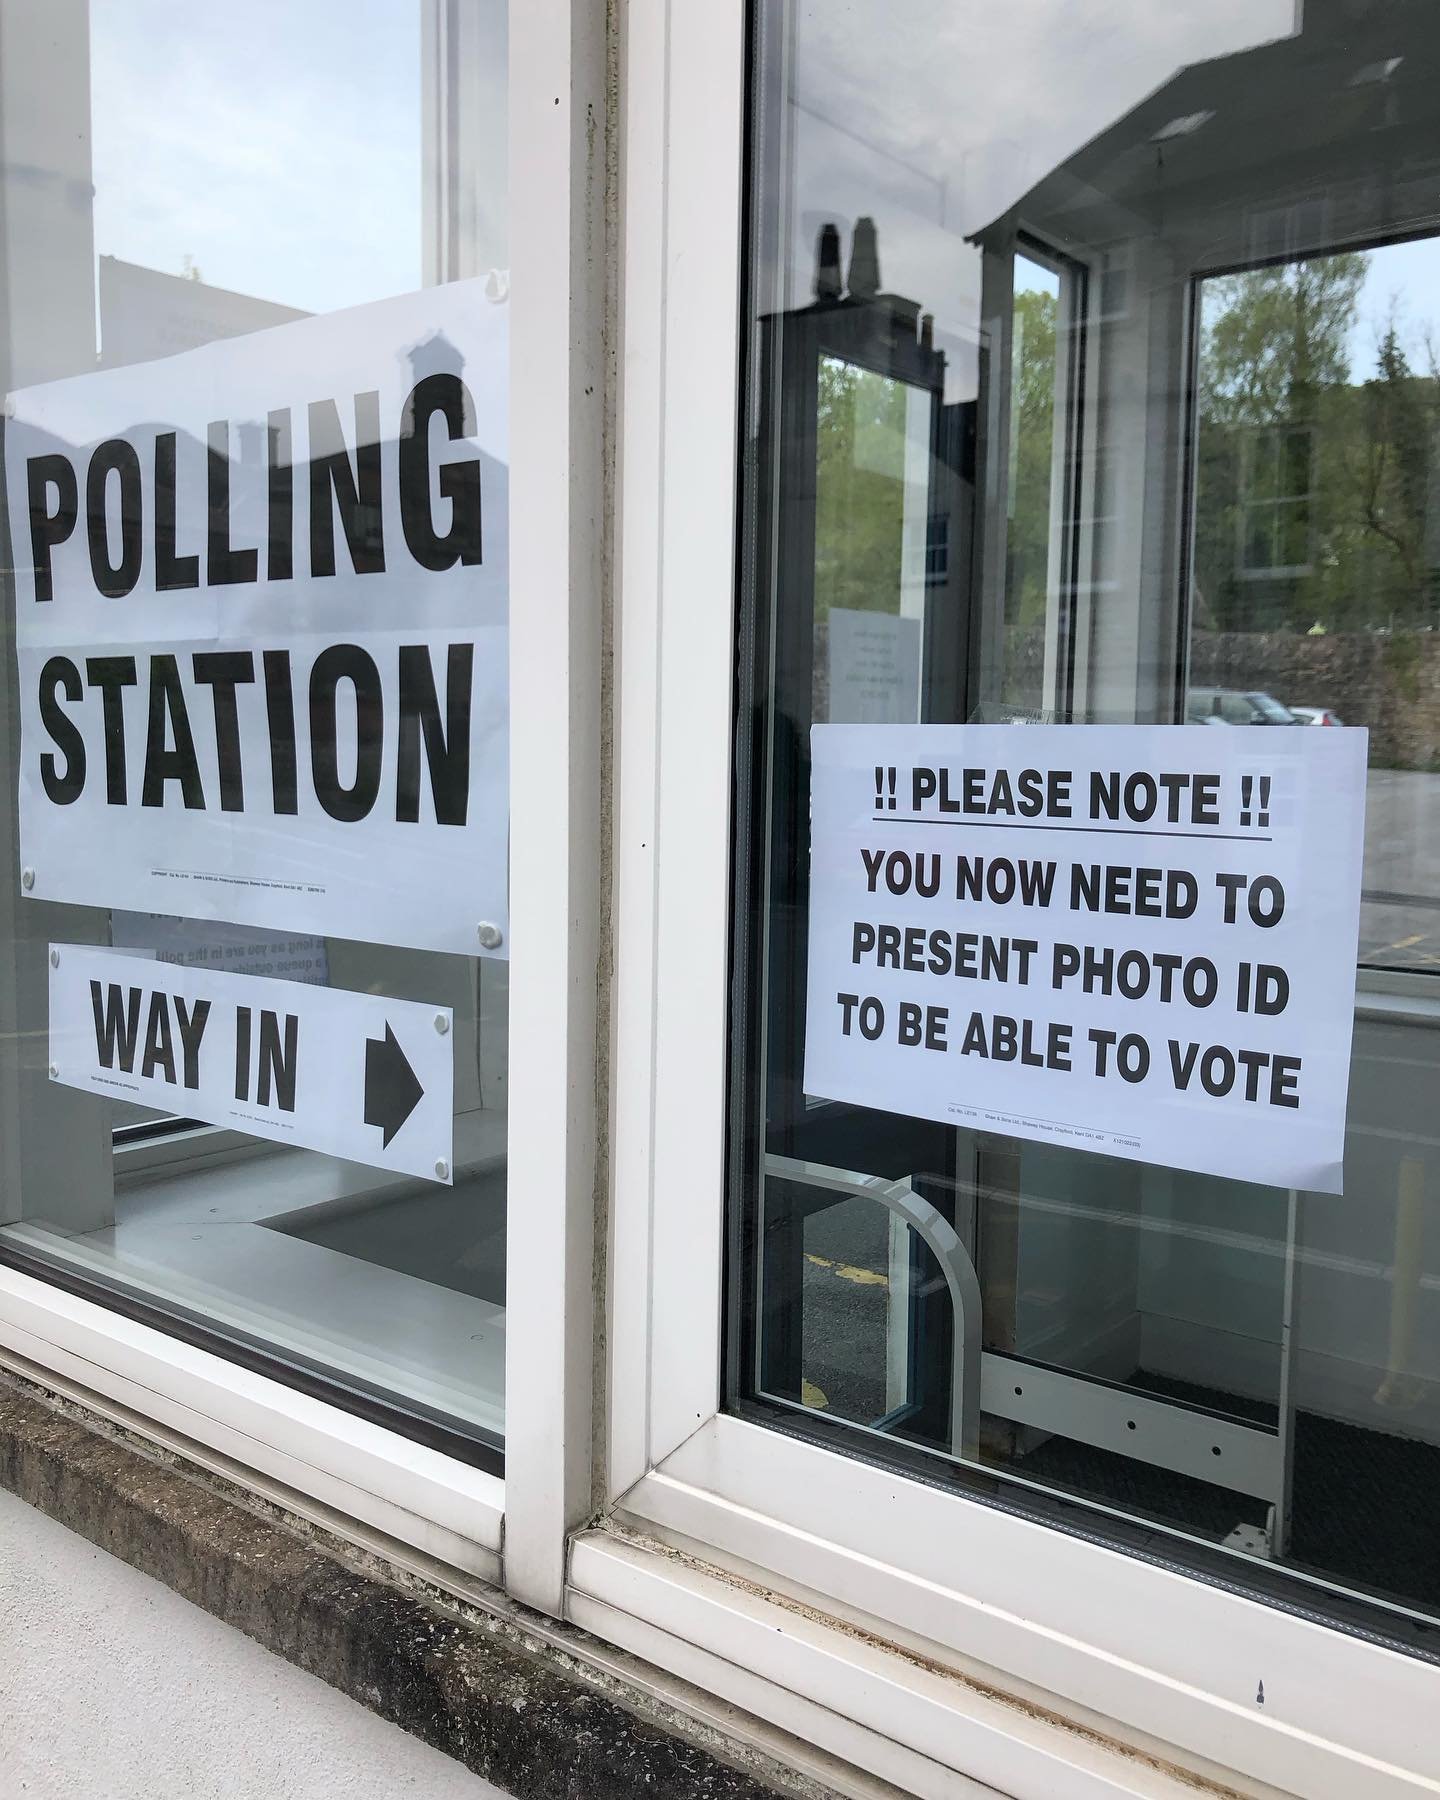 When austerity, cost of living, systemic oppression, state sponsored violence, climate emergency &hellip; all the things&hellip; can leave us feeling so out of control &hellip;

It feels good to vote. 

A small way we can DO something. Use our voice.